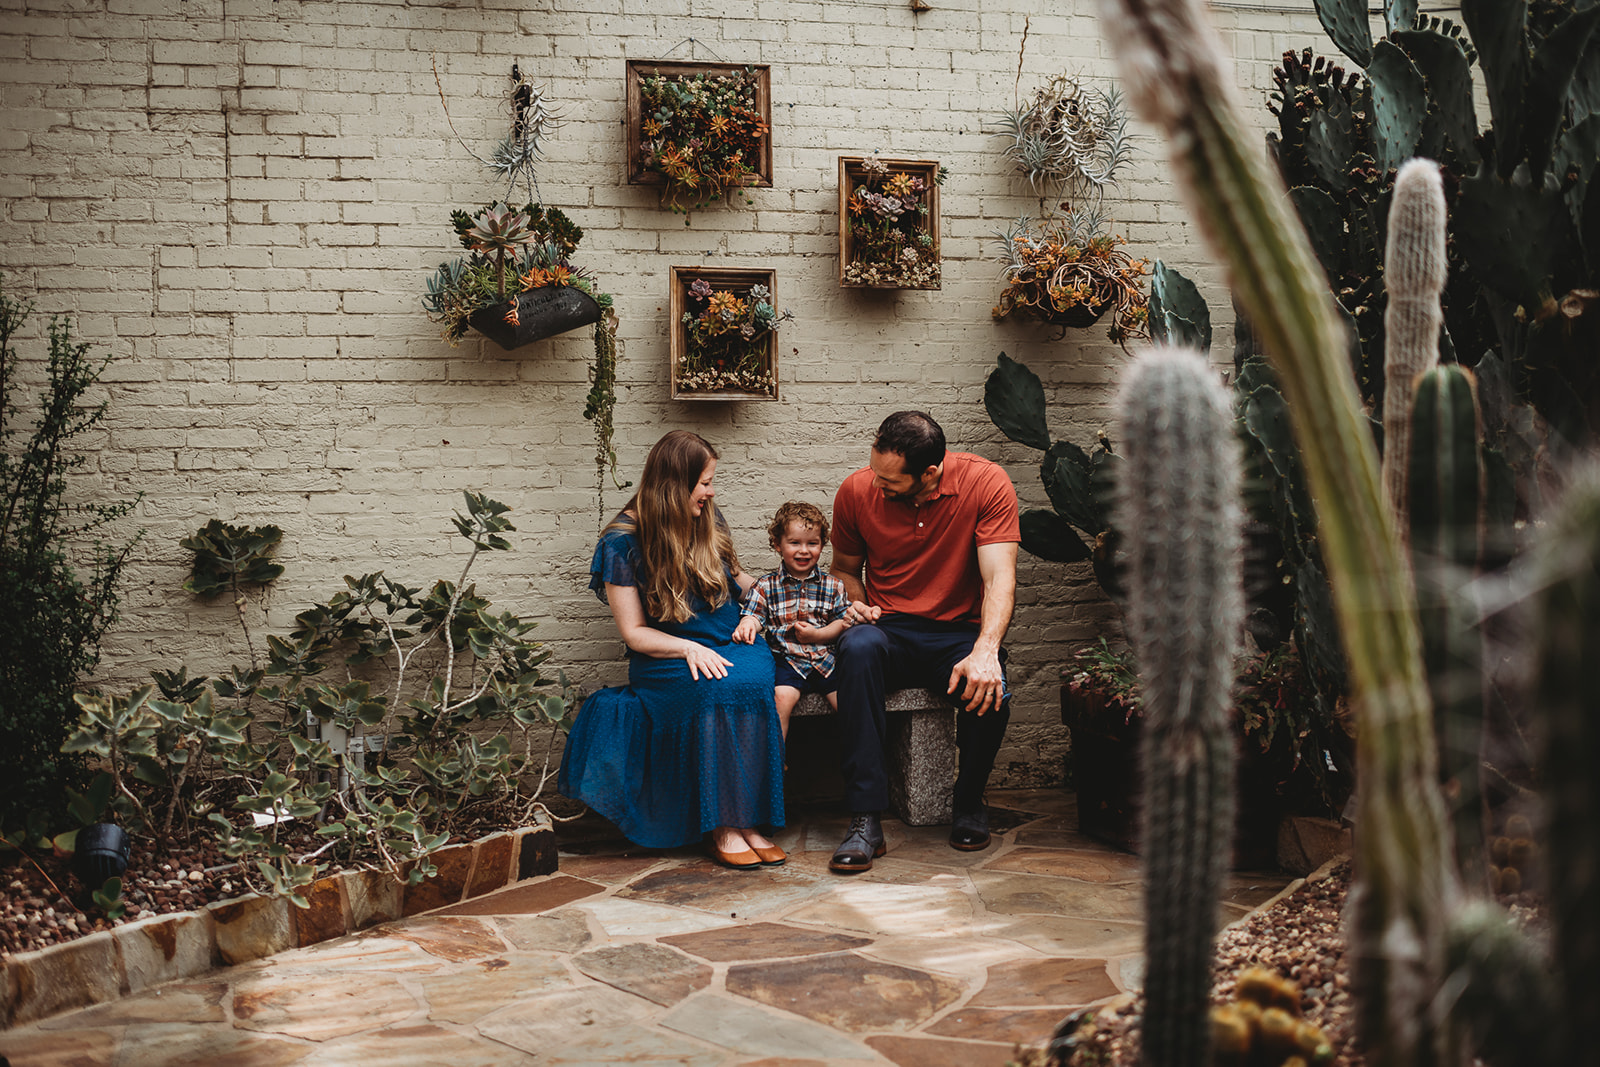 mother and father sitting on a bench together with their toddler child in a courtyard full of cacti